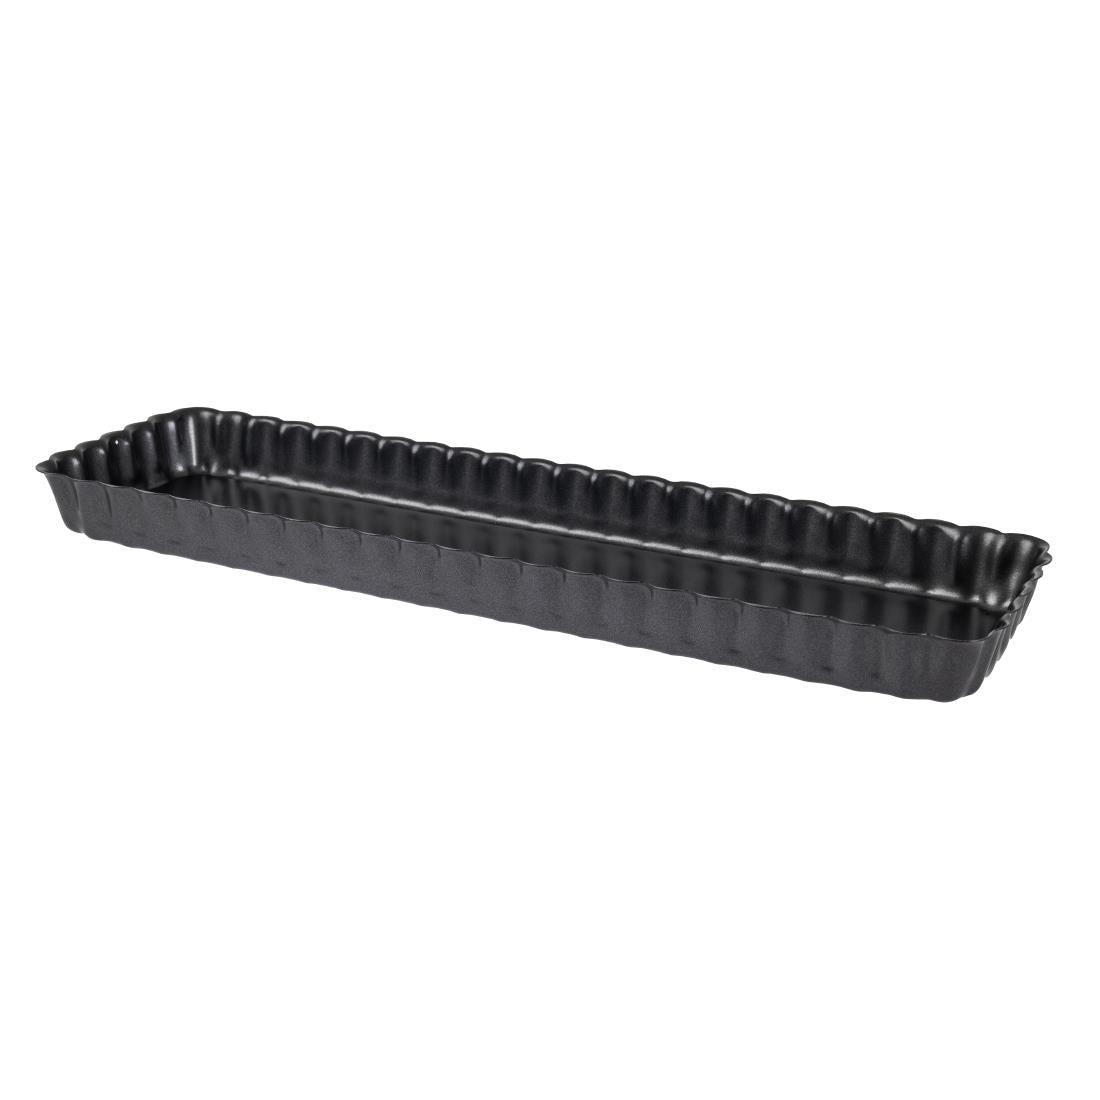 CY117 De Buyer Non-Stick Rectangular Tart Mould With Removable Base 36 cm JD Catering Equipment Solutions Ltd